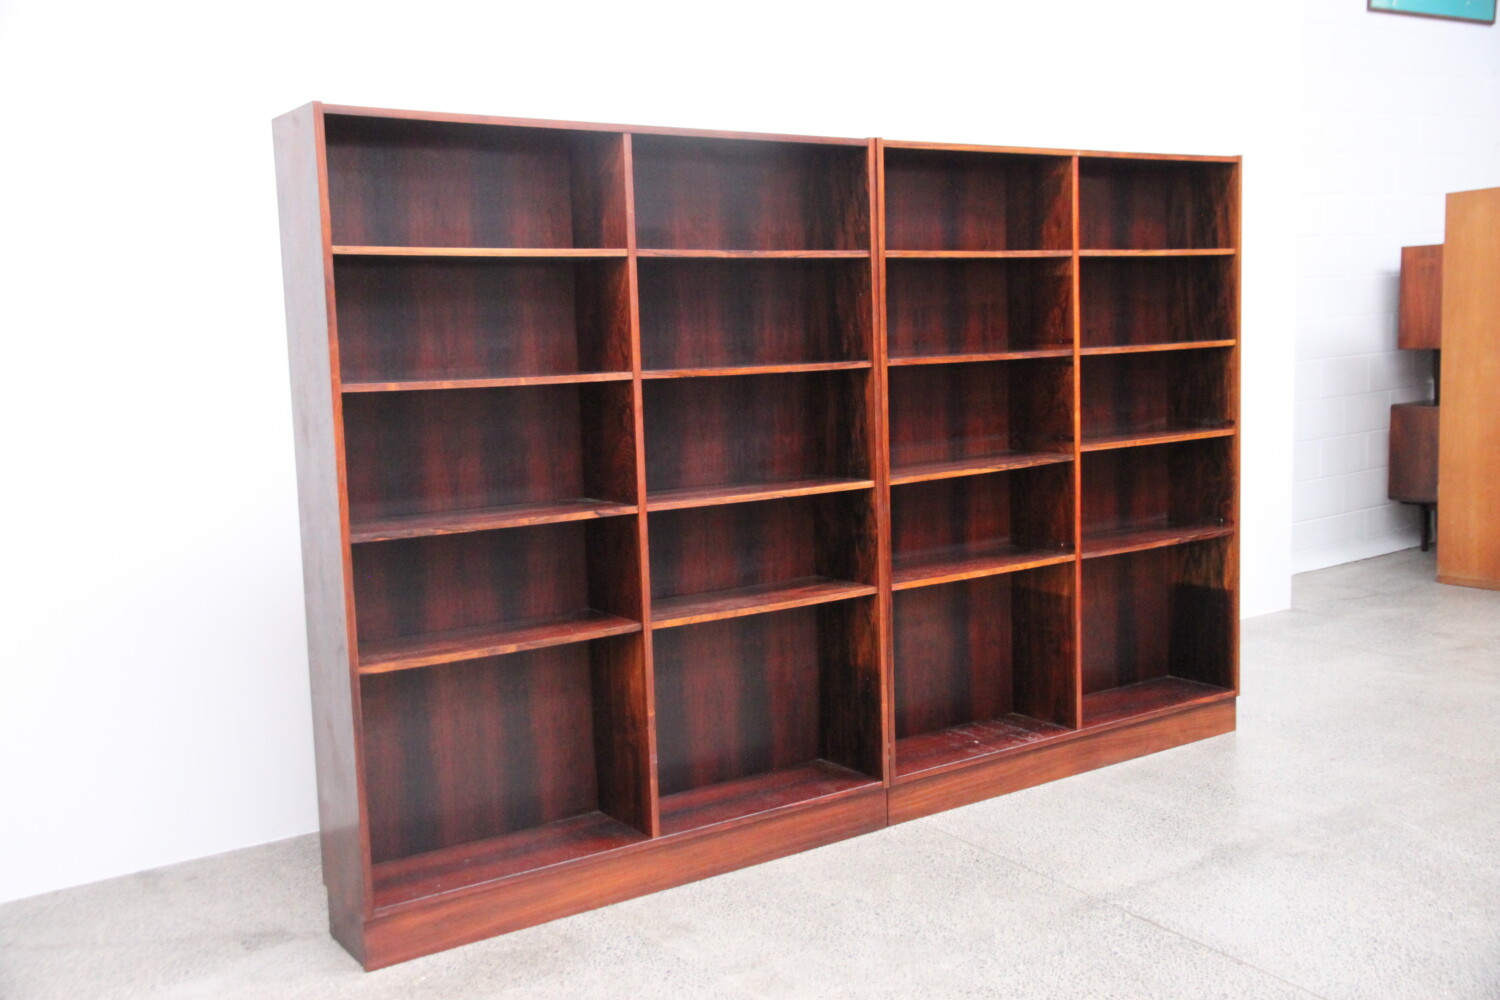 Danish Bookcases by Dammand & Rasmussen (x1 available)